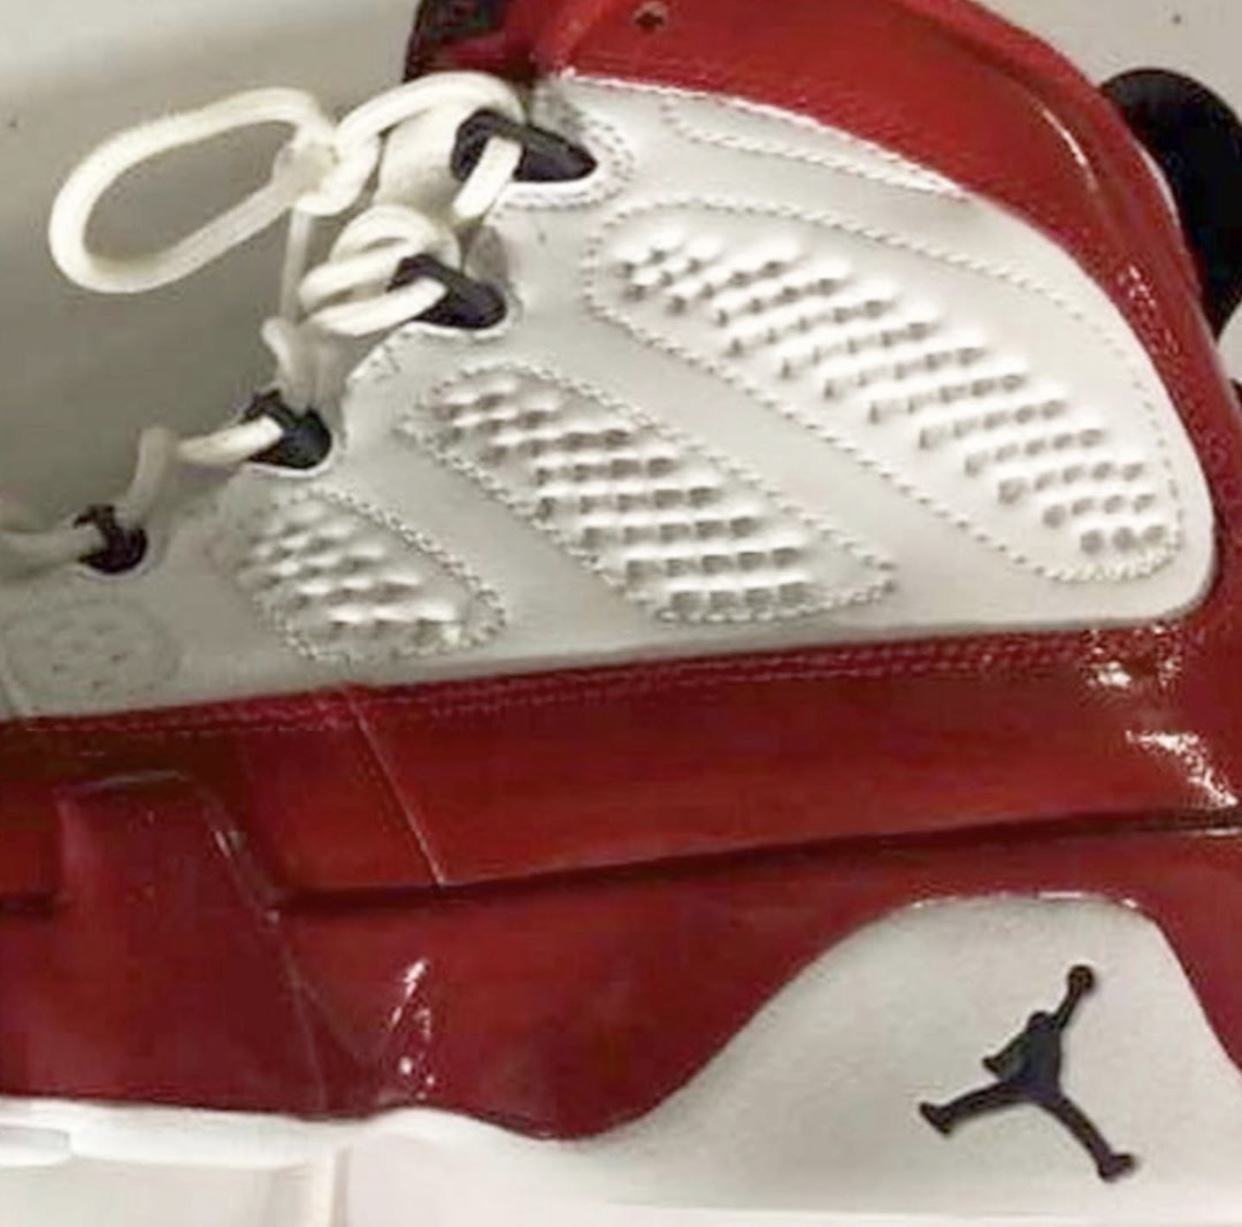 red and white jordan 9 2019